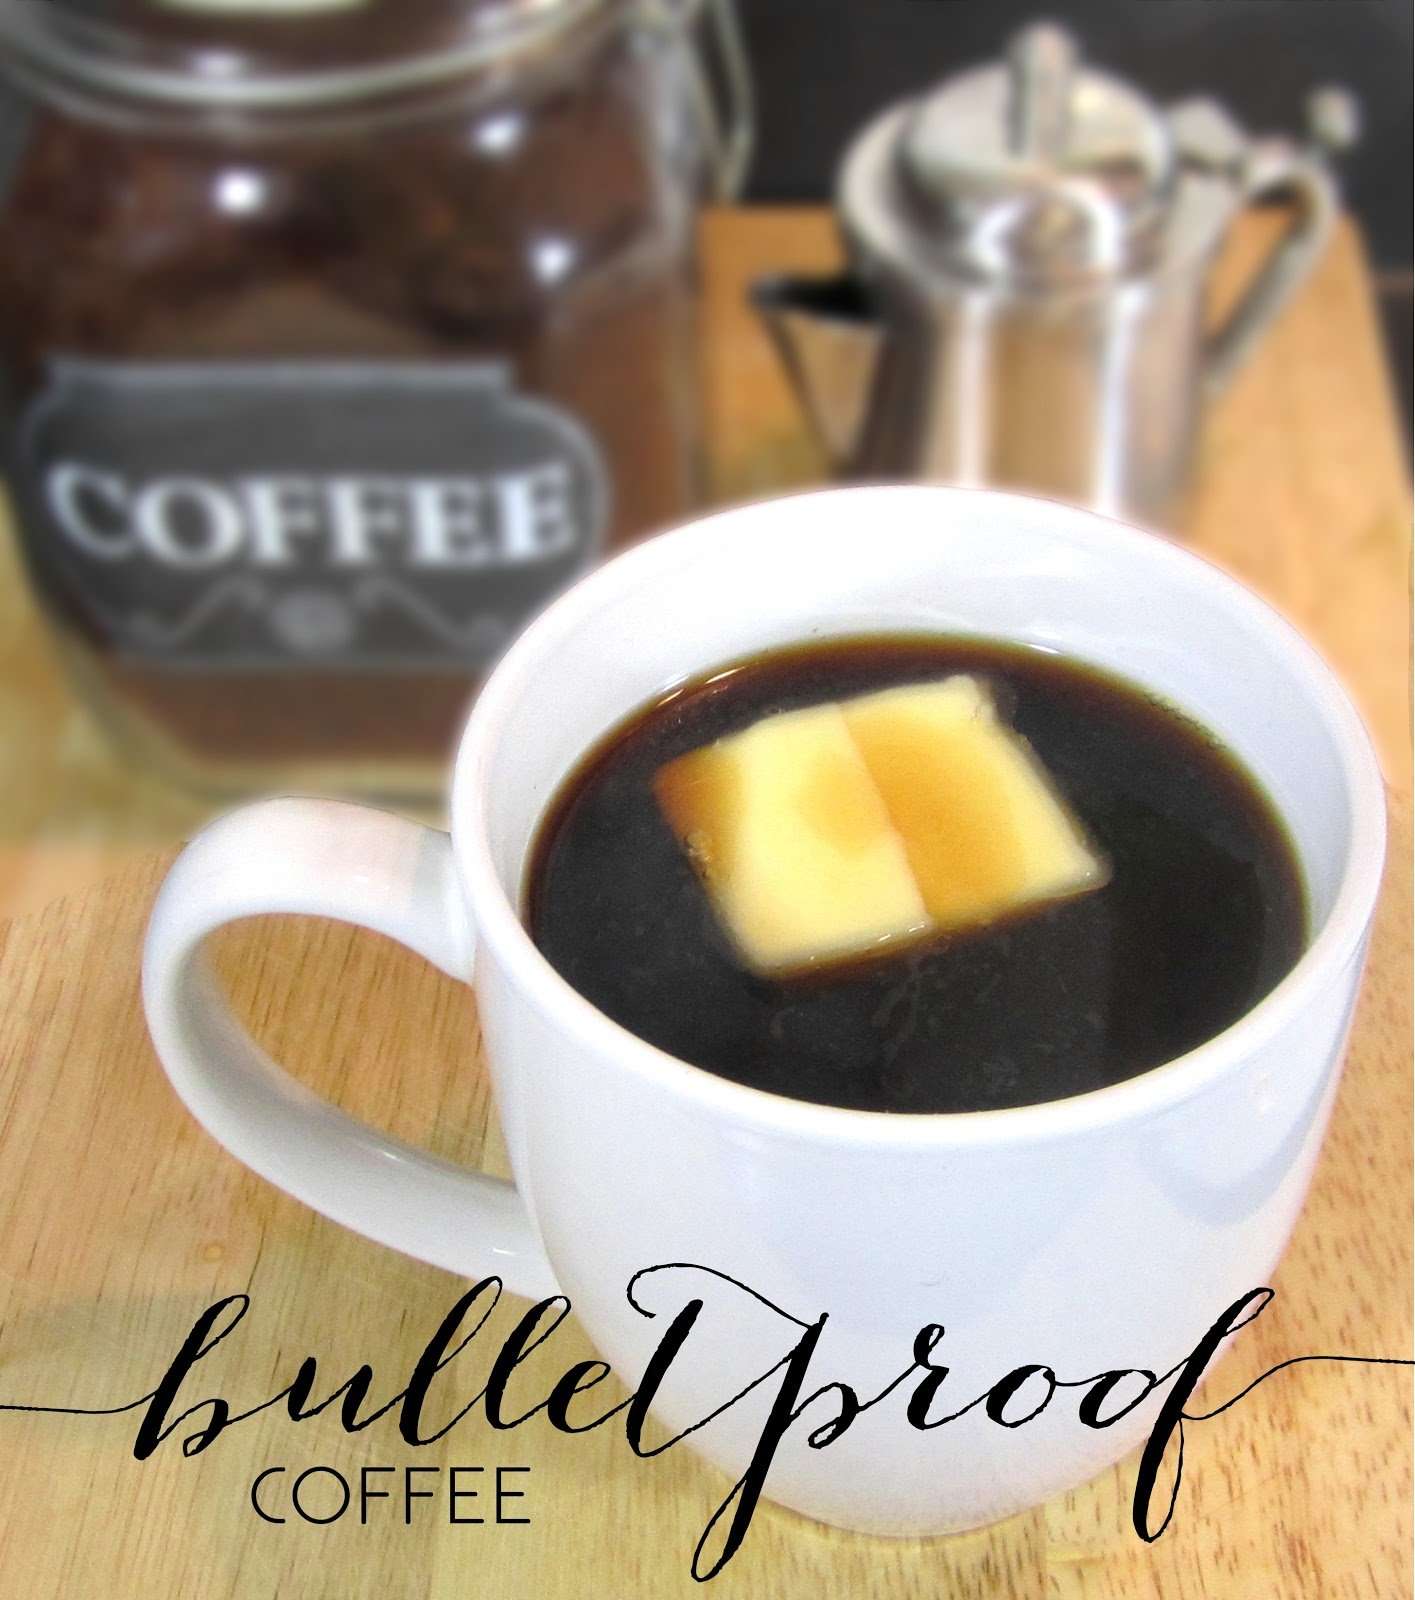 365 Designs: Bulletproof Coffee with Imported Butter